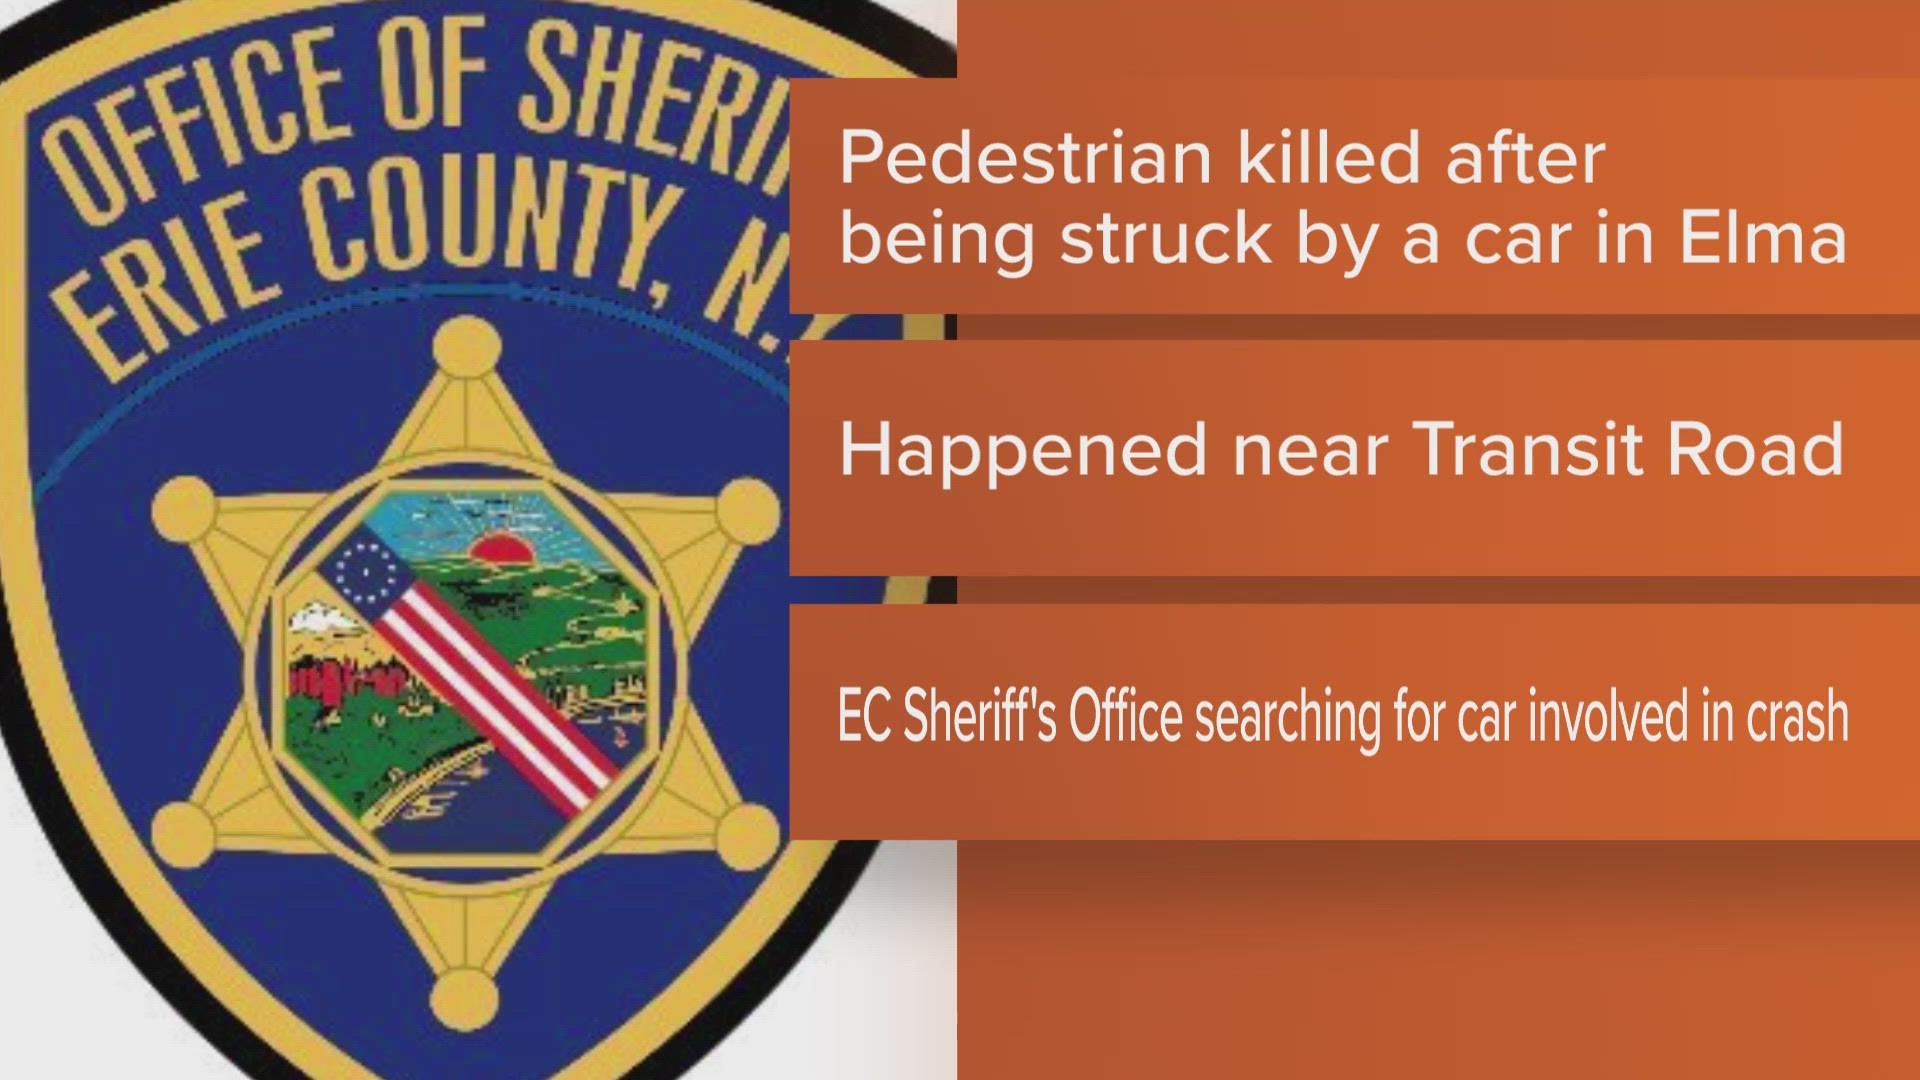 If you have any information about the crash, call the Erie County Sheriff's Office.